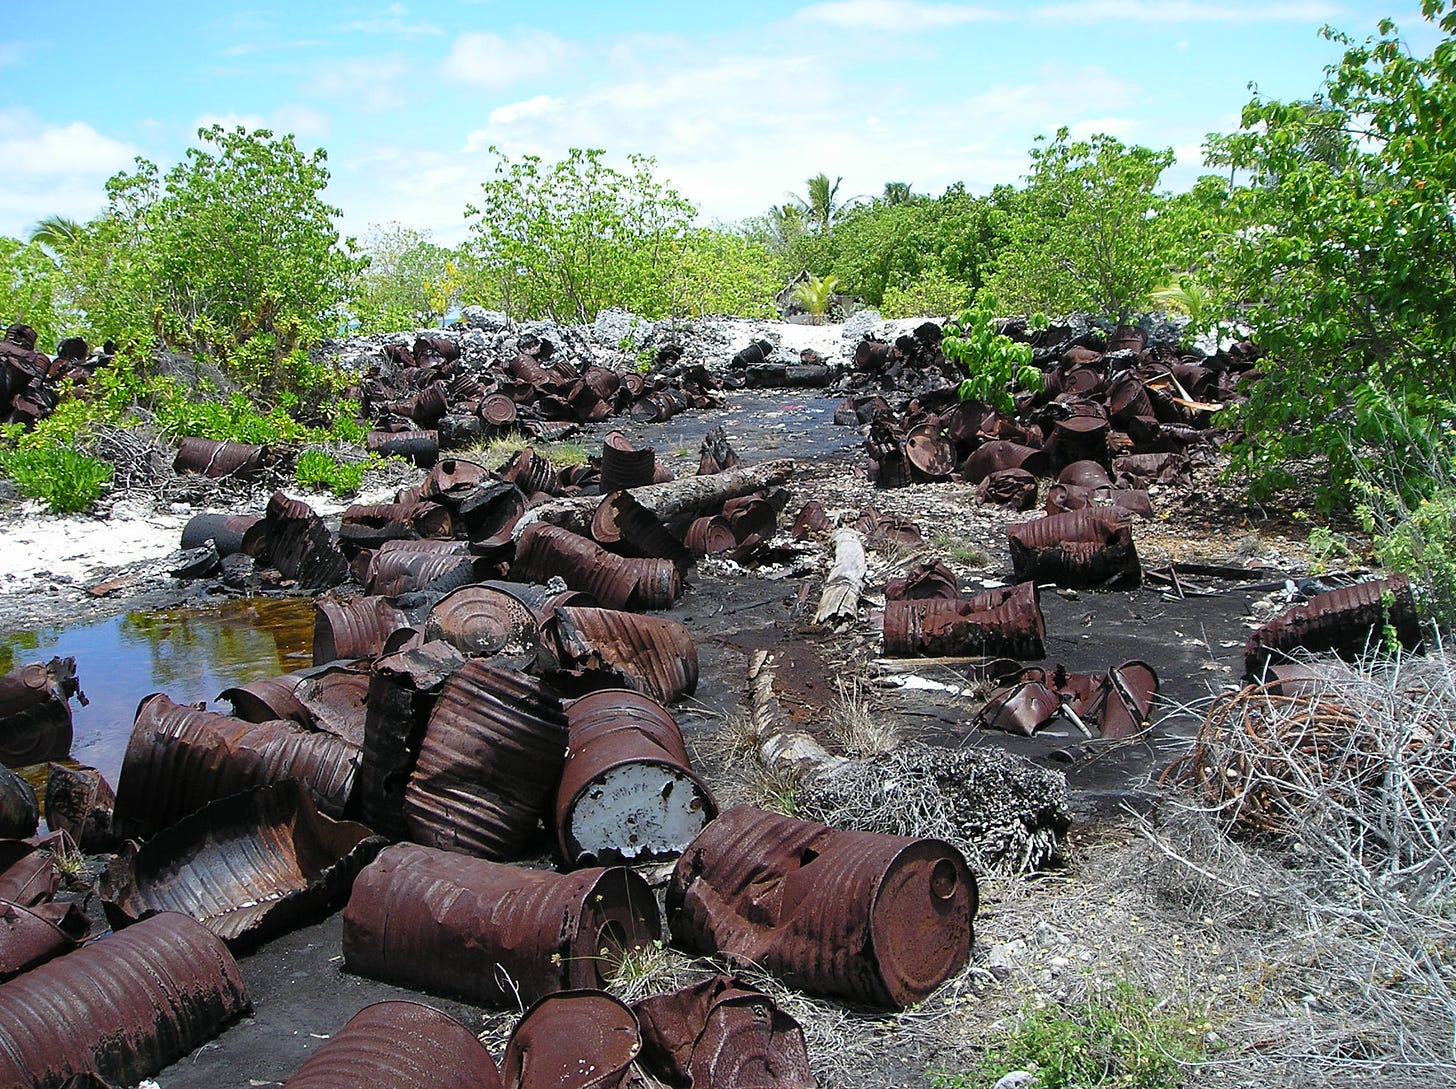 Over forty years after testing finished, hazardous military including significant bitumen spills and over 350 metric tonnes of asbestos-containing materials littered Kiribati © Safety & Ecology Corporation Ltd.